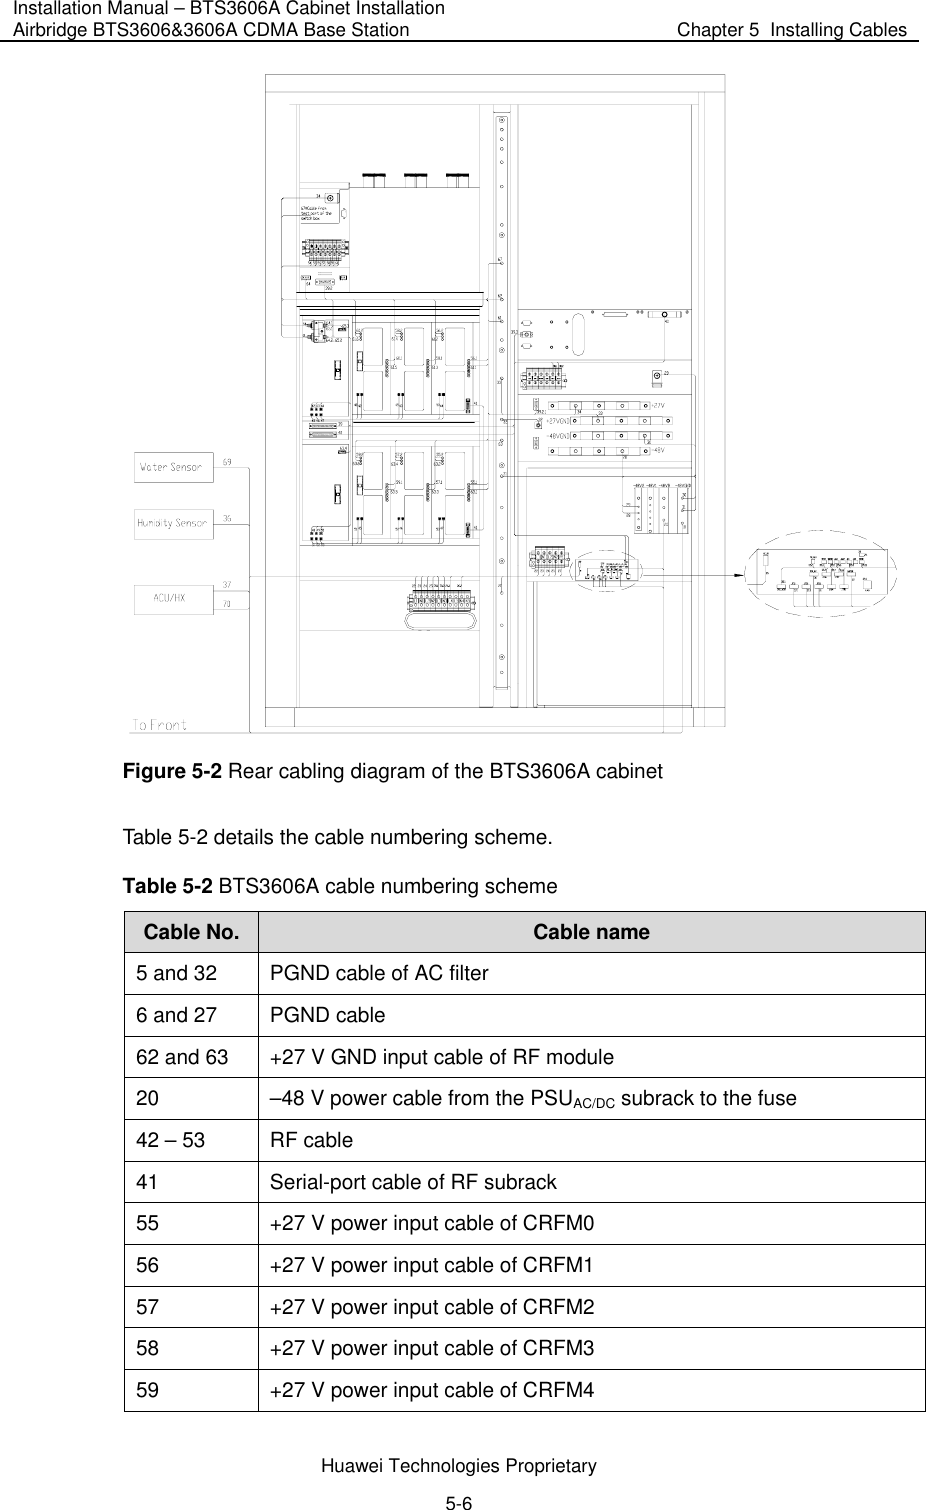 Installation Manual – BTS3606A Cabinet Installation Airbridge BTS3606&amp;3606A CDMA Base Station  Chapter 5  Installing Cables  Huawei Technologies Proprietary 5-6  Figure 5-2 Rear cabling diagram of the BTS3606A cabinet Table 5-2 details the cable numbering scheme. Table 5-2 BTS3606A cable numbering scheme Cable No.  Cable name 5 and 32  PGND cable of AC filter 6 and 27  PGND cable 62 and 63  +27 V GND input cable of RF module 20  –48 V power cable from the PSUAC/DC subrack to the fuse 42 – 53  RF cable 41  Serial-port cable of RF subrack 55  +27 V power input cable of CRFM0 56  +27 V power input cable of CRFM1 57  +27 V power input cable of CRFM2 58  +27 V power input cable of CRFM3 59  +27 V power input cable of CRFM4 